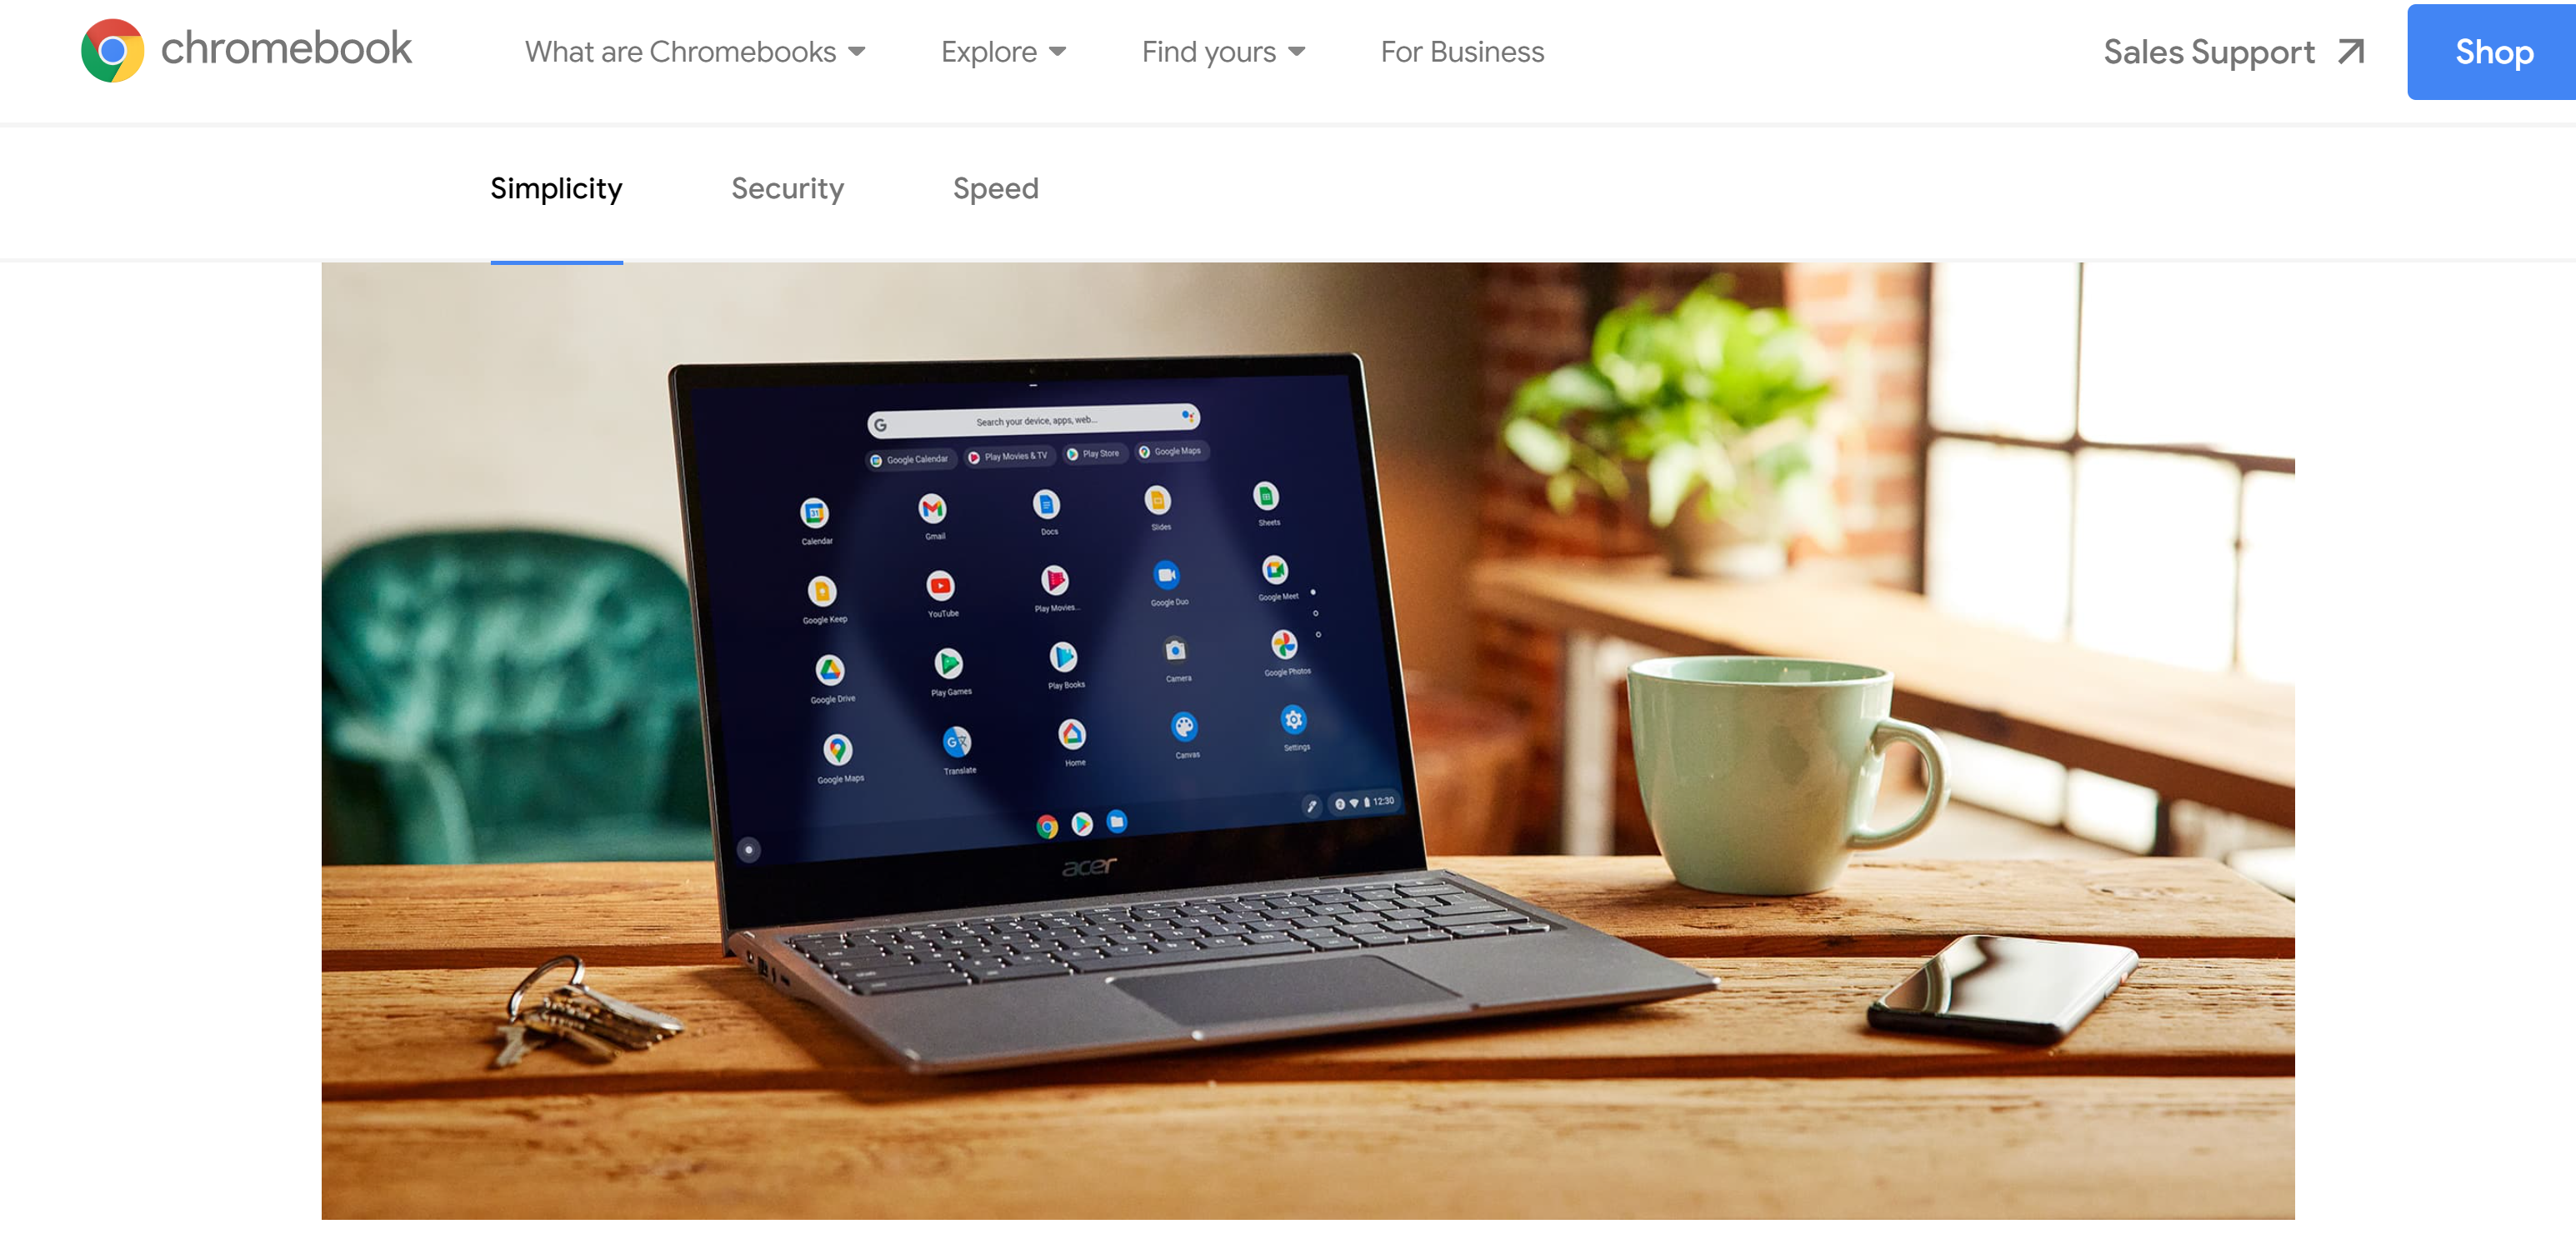 UNDERSTANDING CHROMEBOOK - Chrome OS And Features